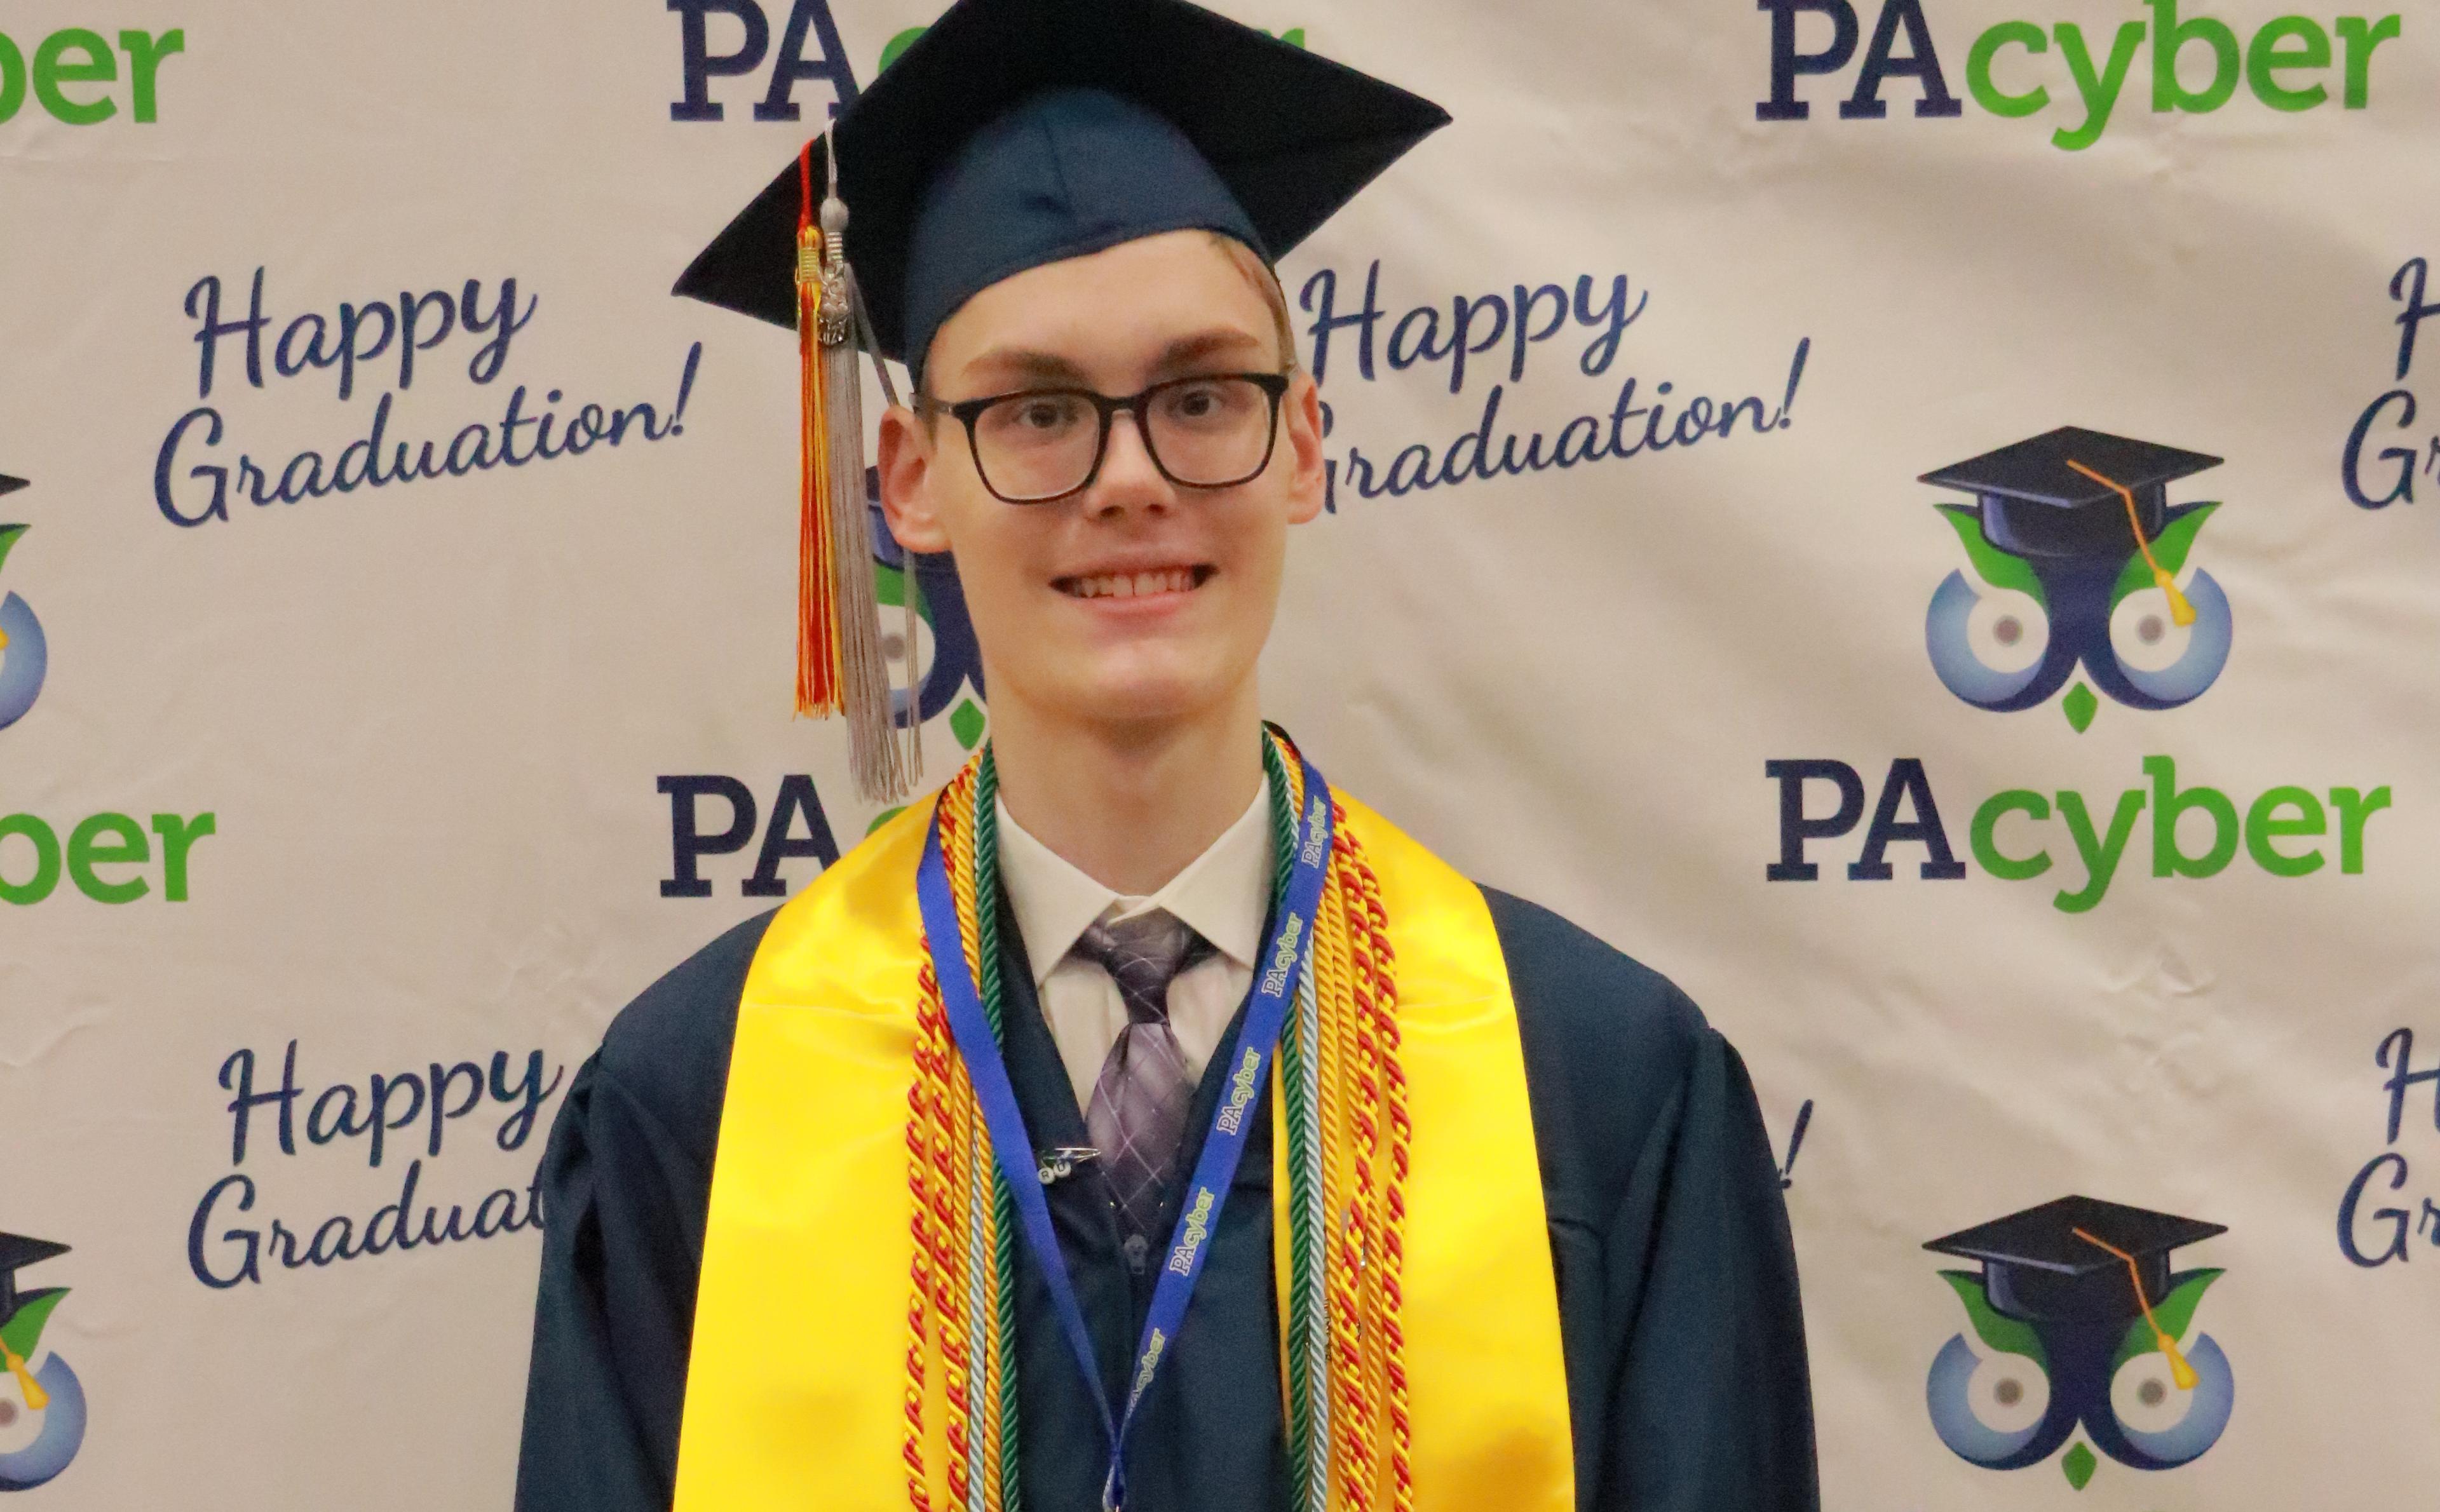 PA Cyber graduate wears cap and gown and several colorful cords.